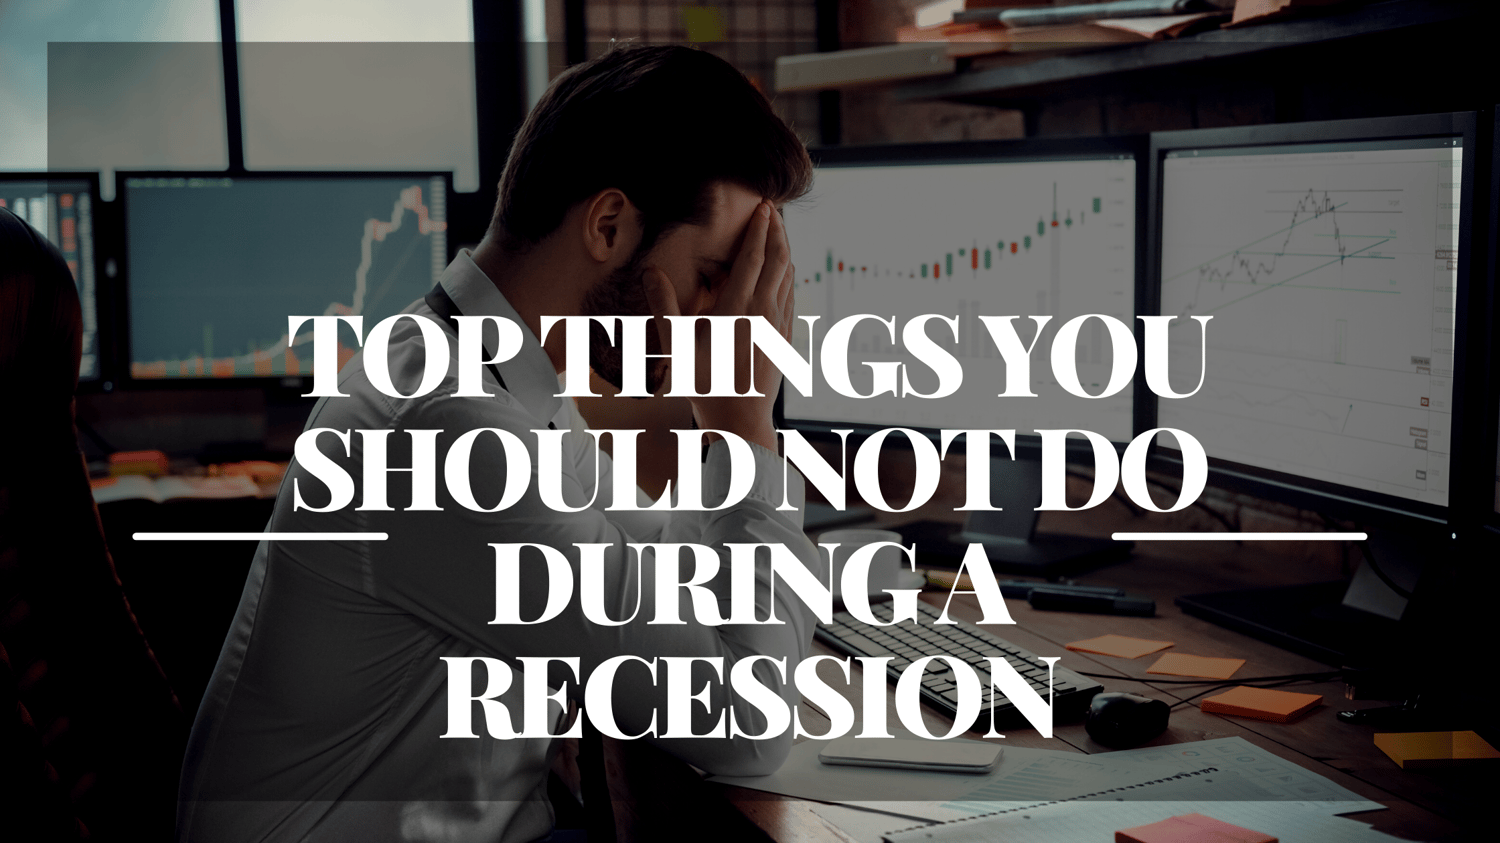 TOP THINGS YOU SHOULD NOT DO DURING A RECESSION